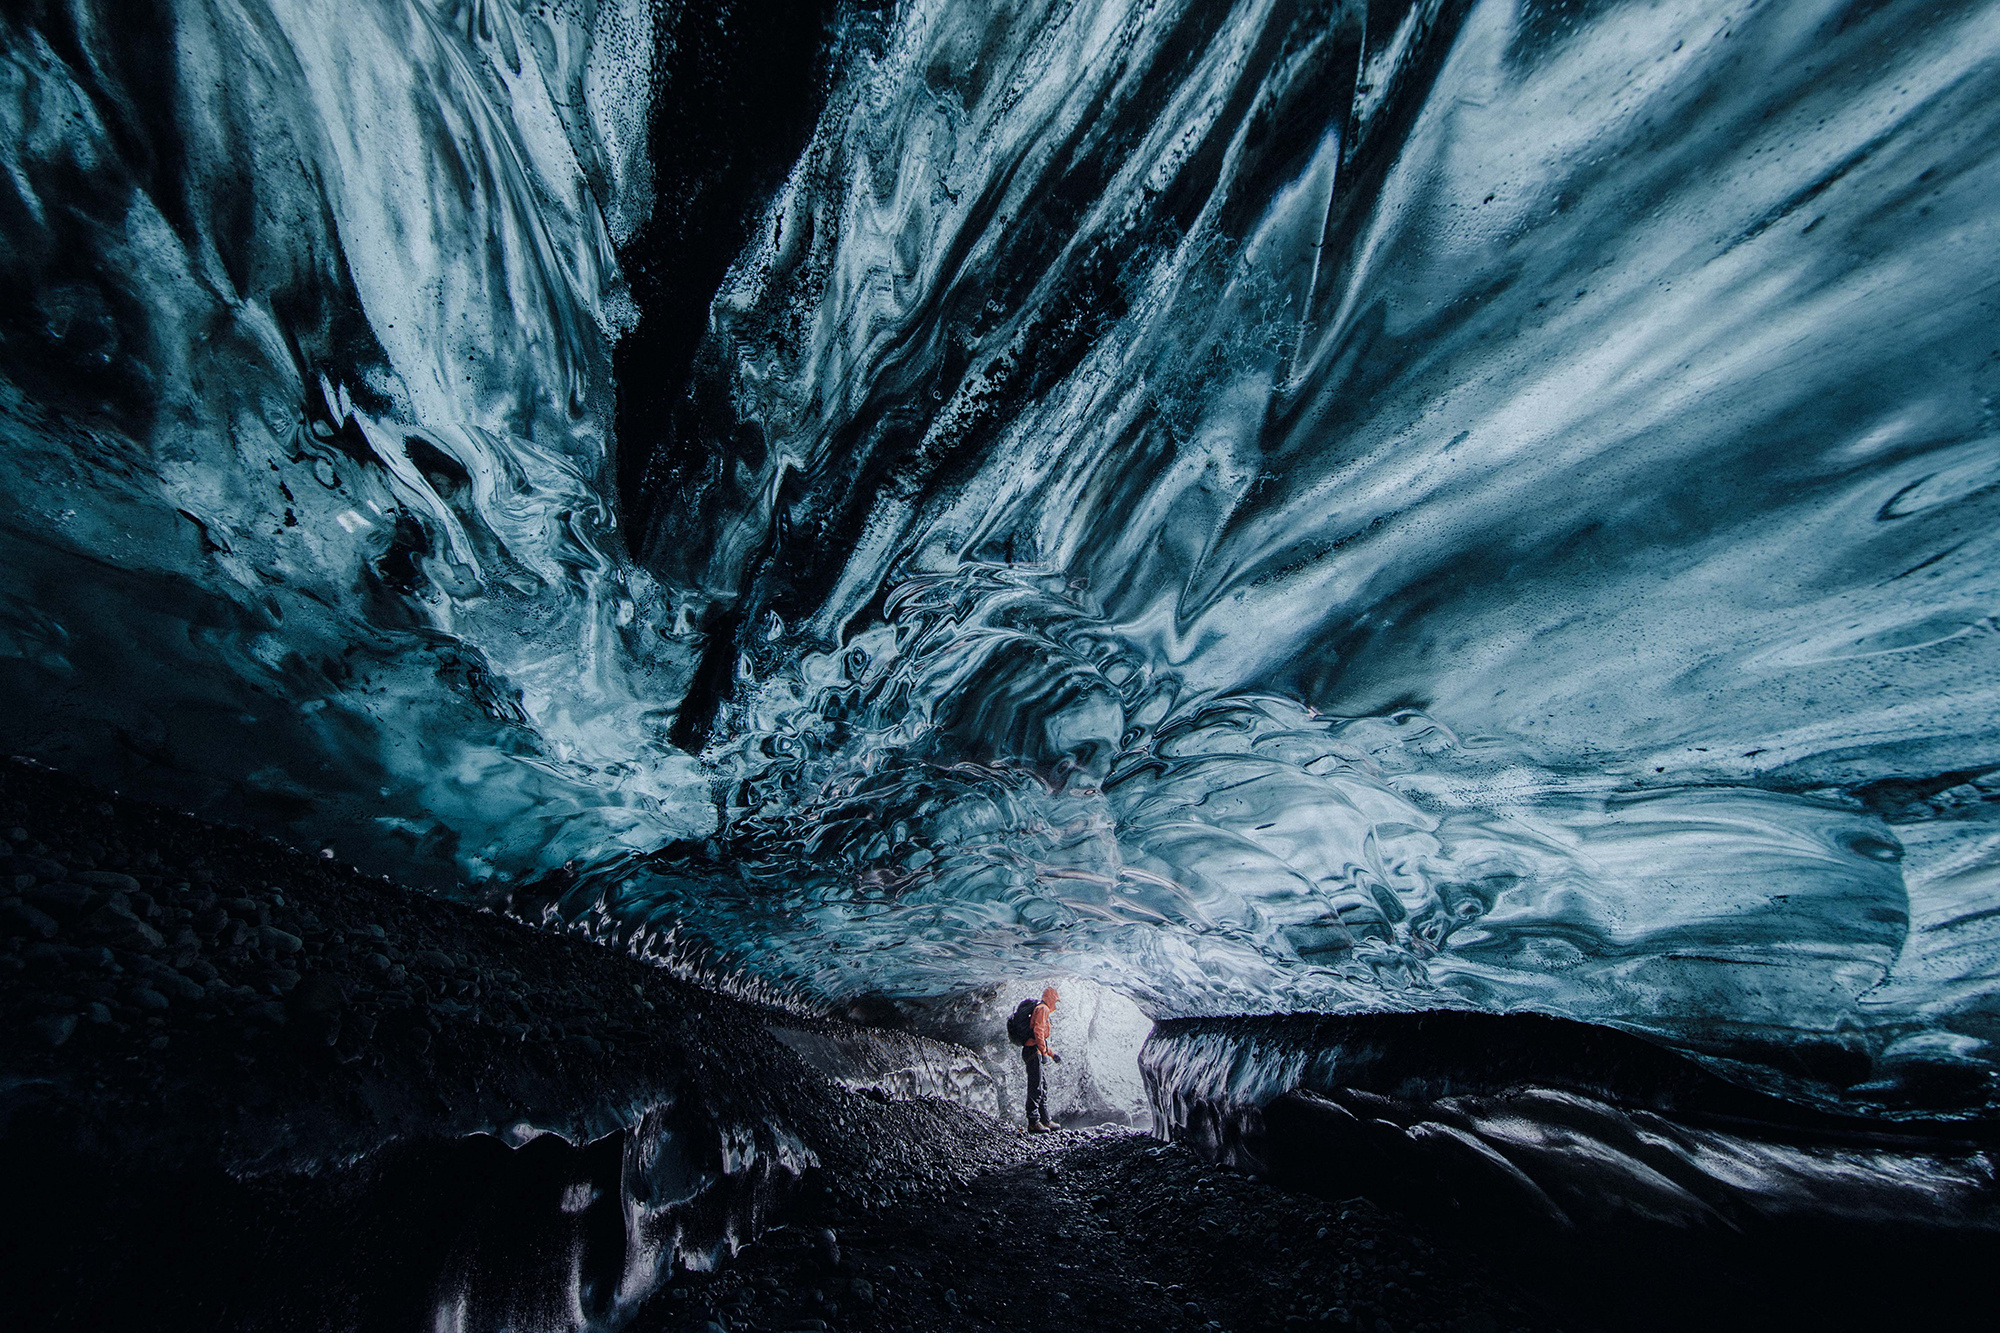 Ice Cave, Jkulsrln's beauty, Helicopter tour adventure, Whistler's icy wonder, 2000x1340 HD Desktop